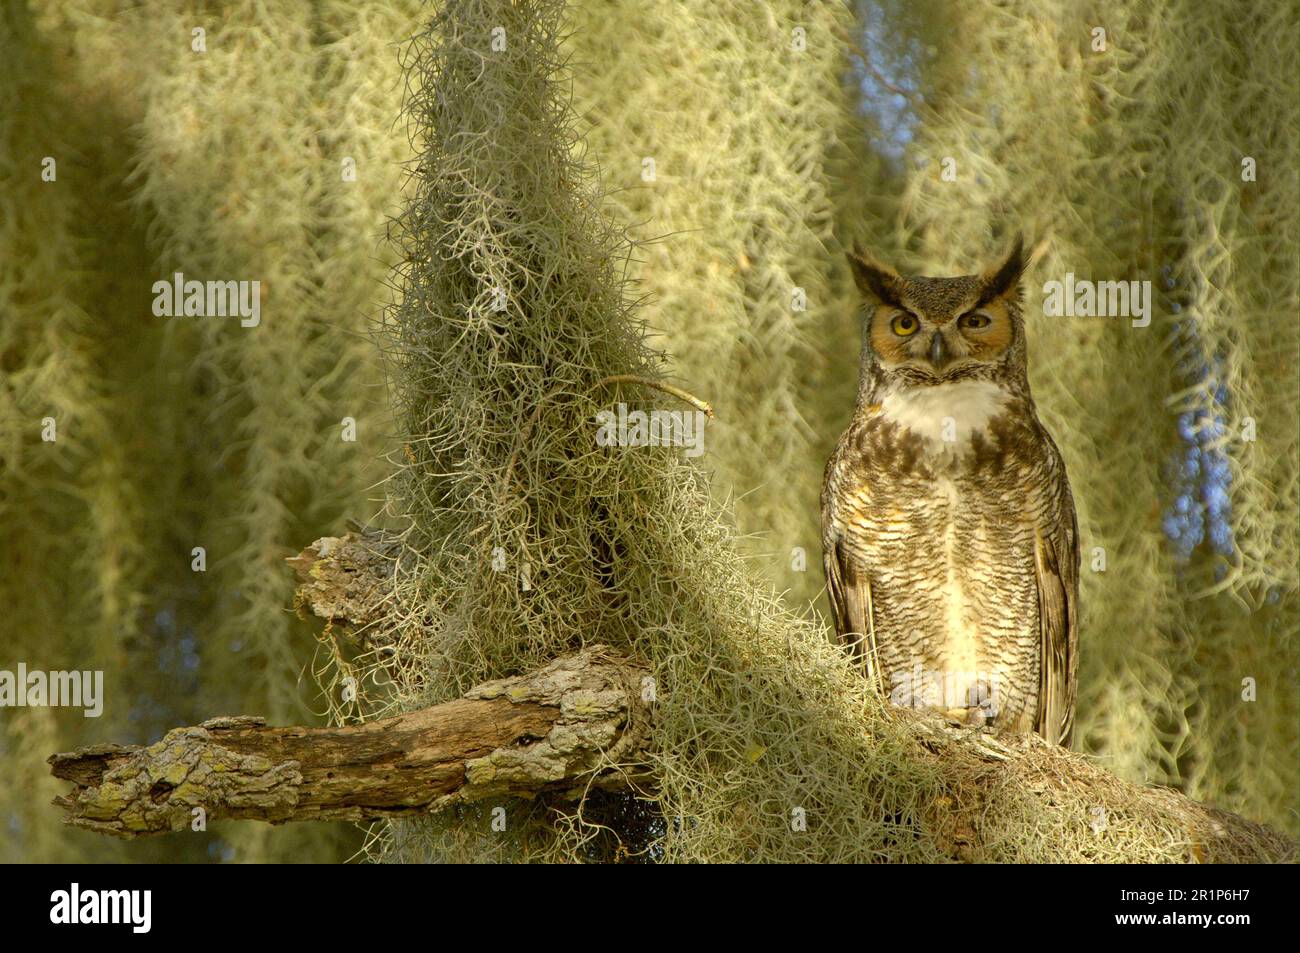 Great Horned Owl (Bubo virginianus) adult, roosting in tree amongst Spanish Moss (Tillandsia sp.), Florida (U.) S. A Stock Photo